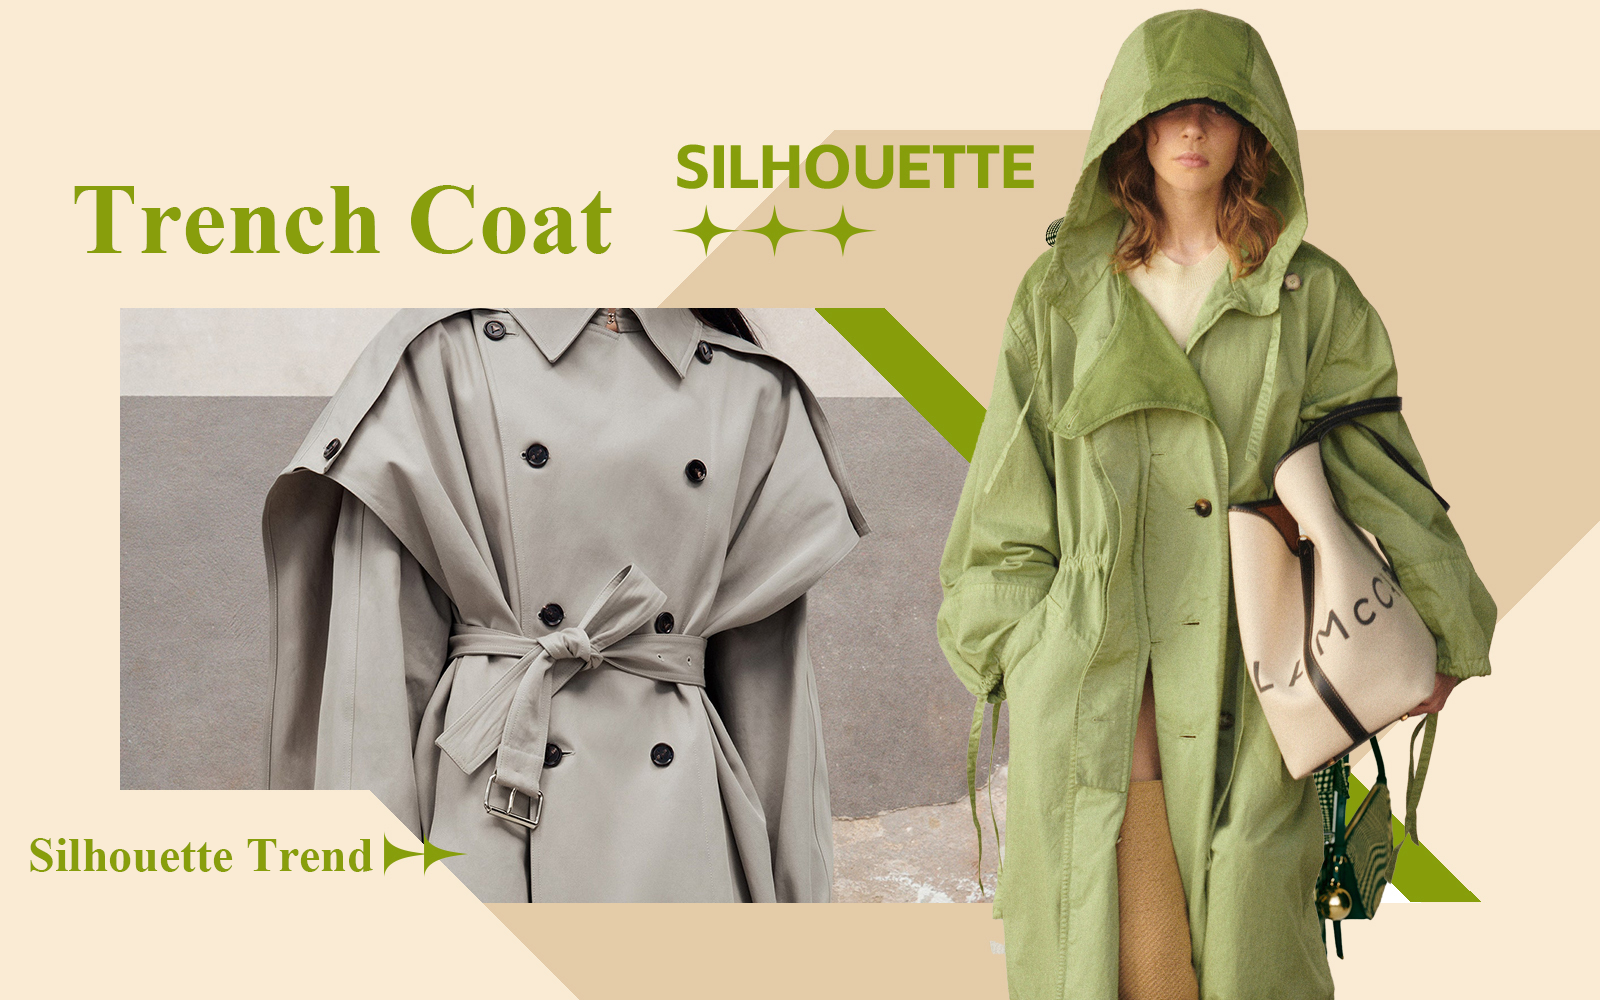 Urban Casual -- The Silhouette Trend for Women's Trench Coat